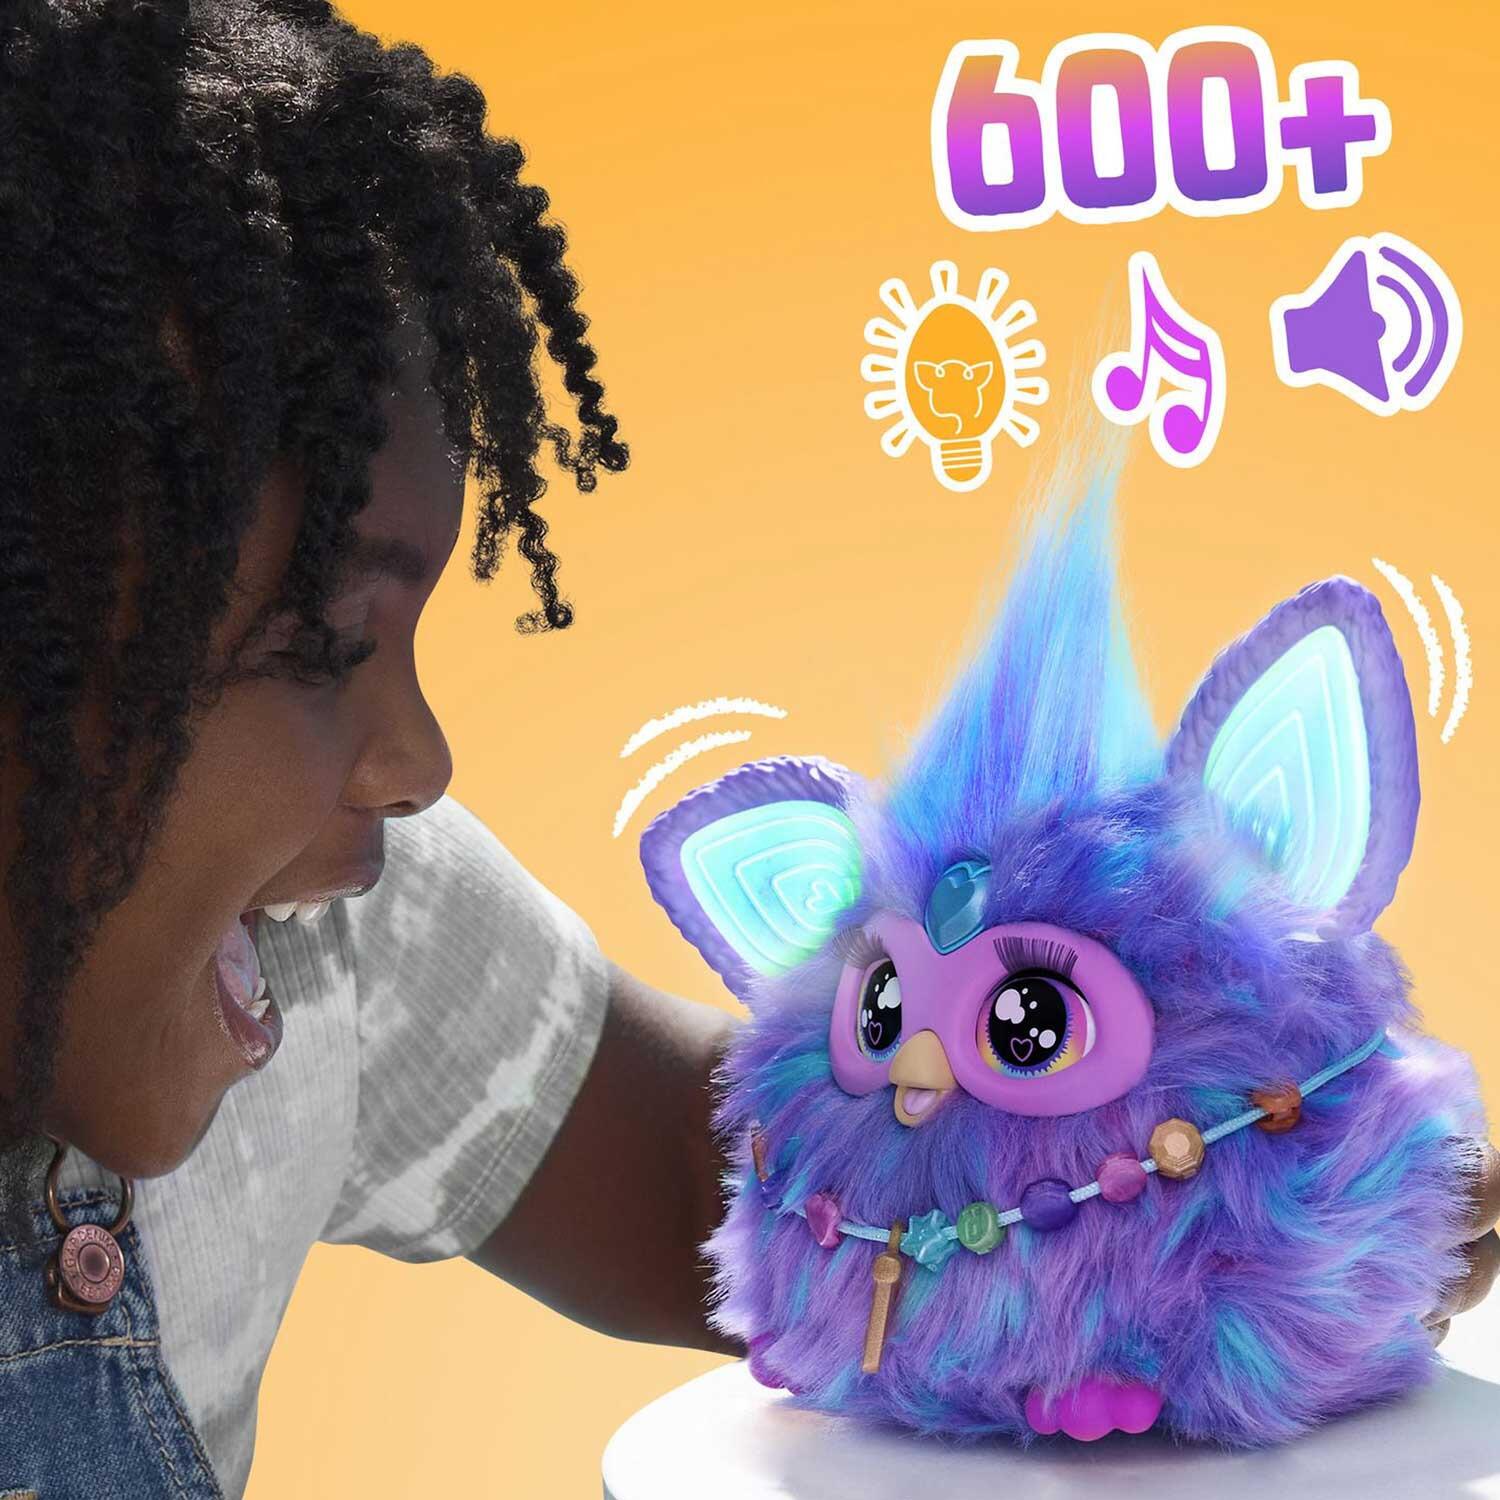 Purple Furby has over 600 sounds